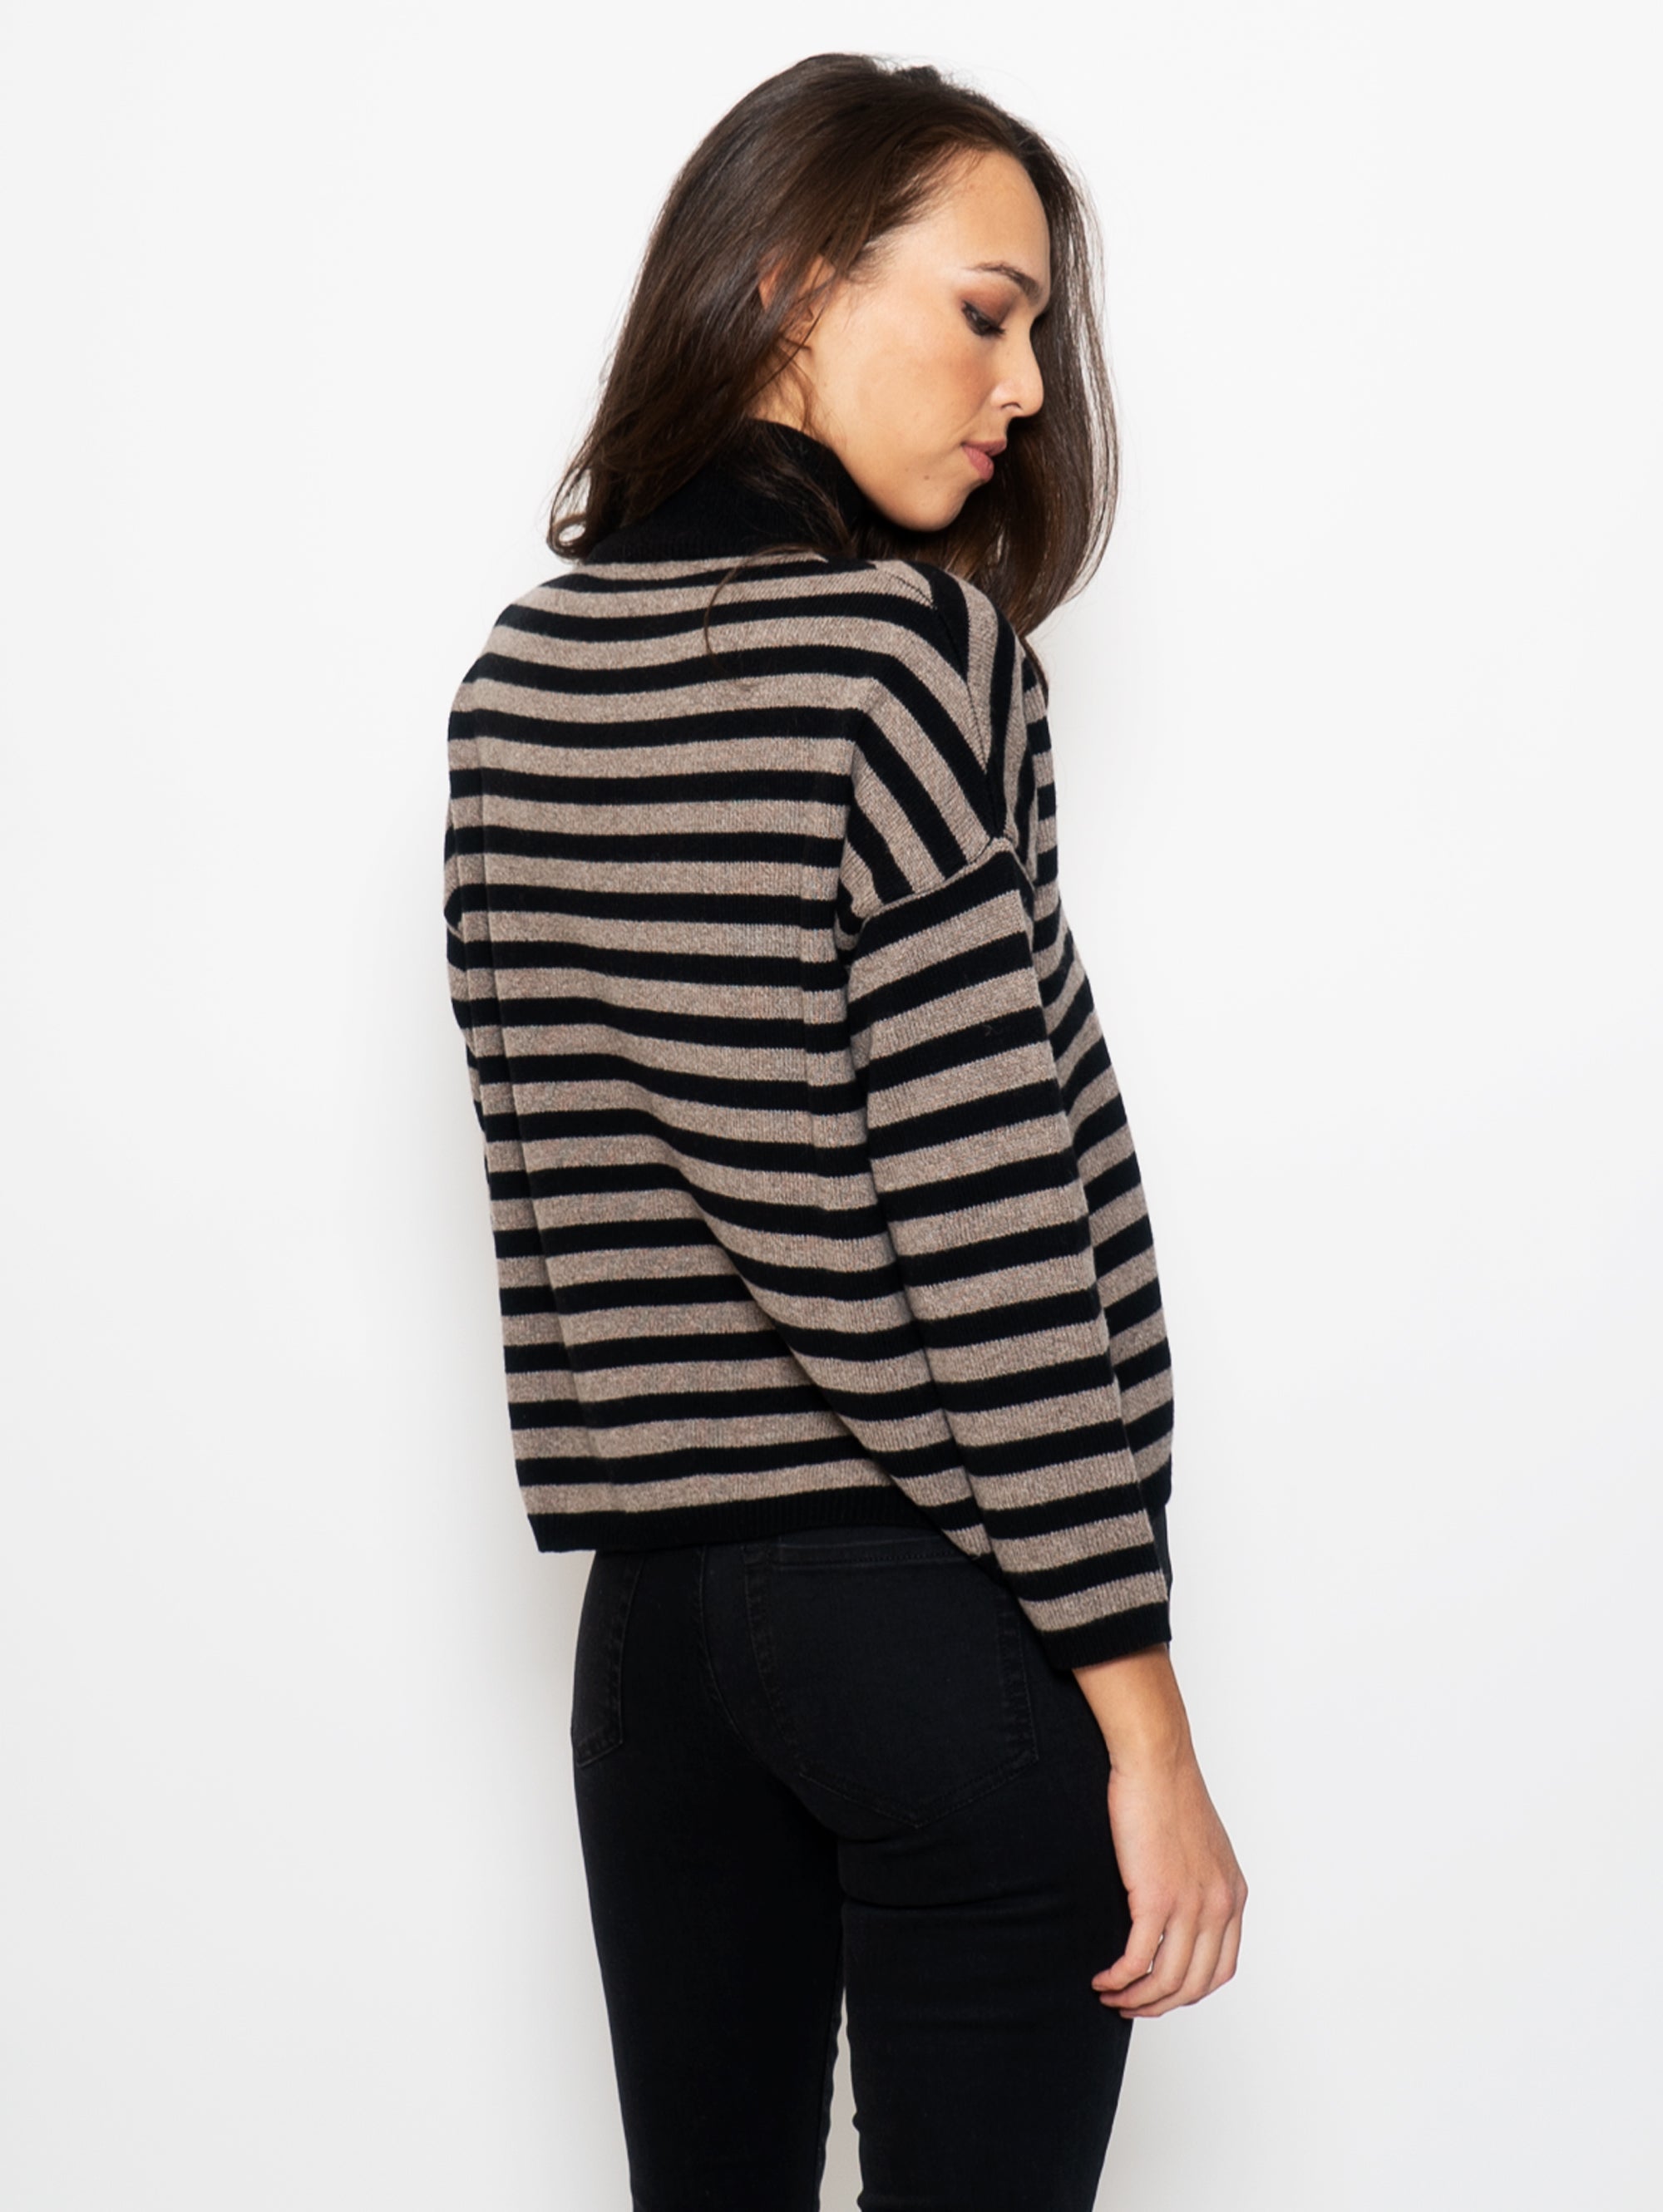 Striped Sweater with High Collar Black / Brown